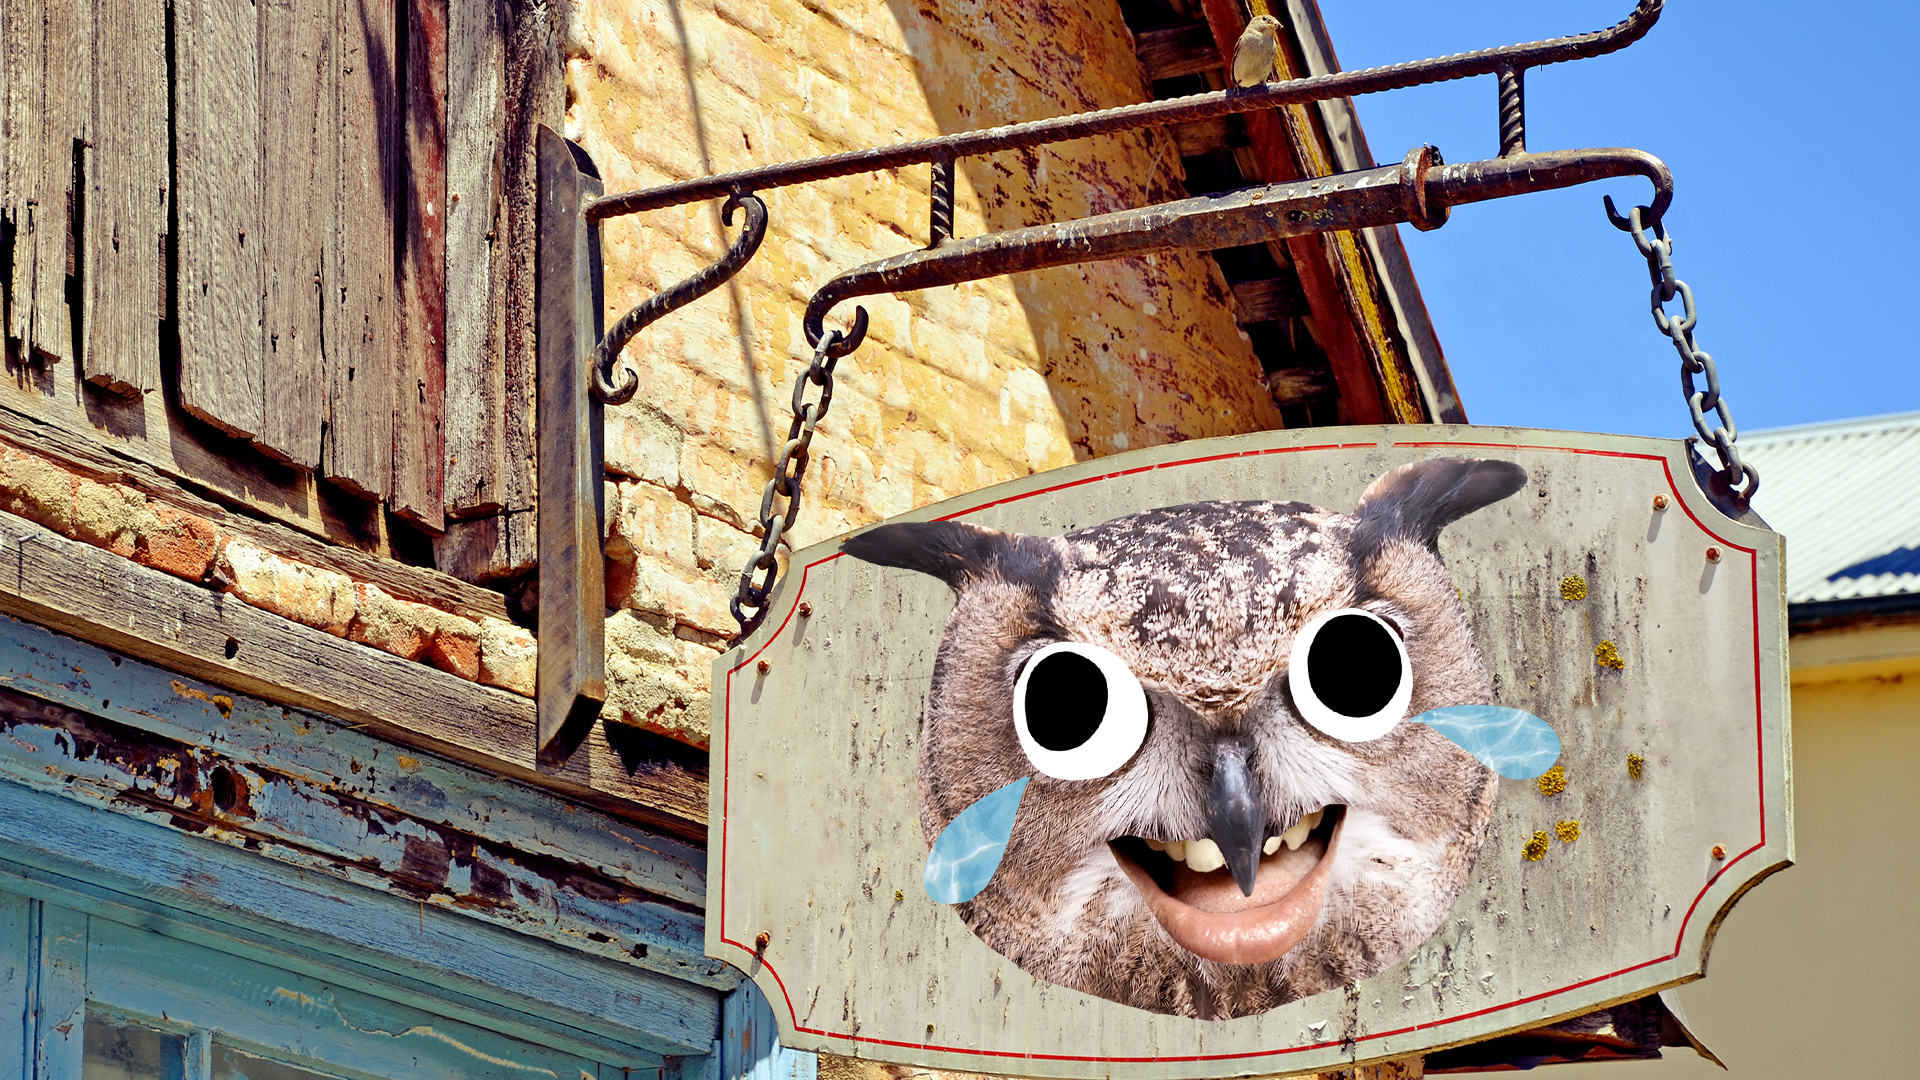 Old shop sign with laughing owl head